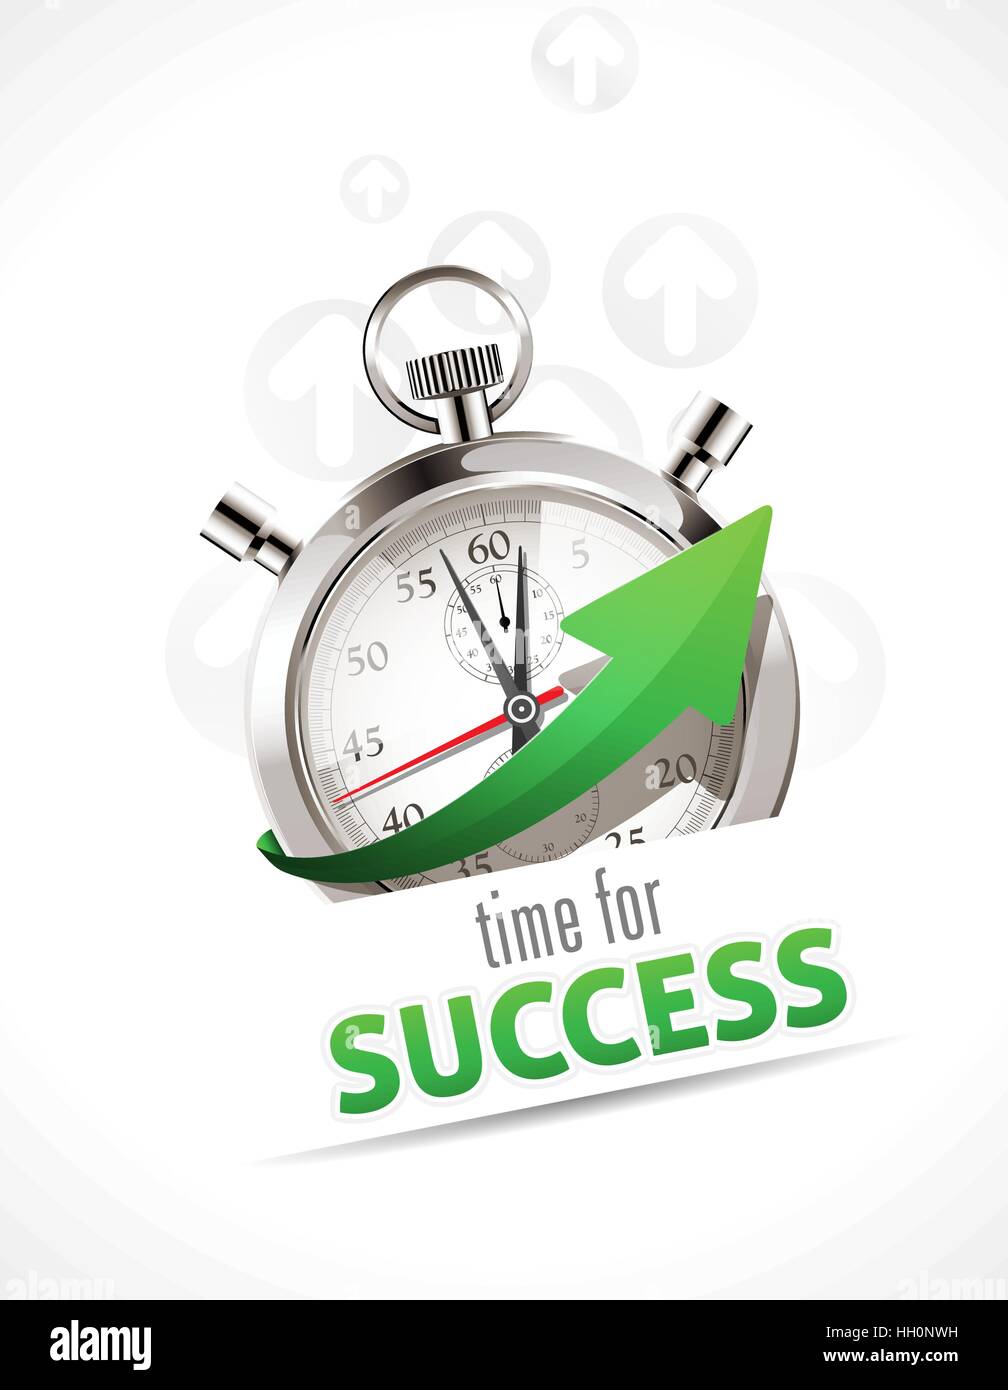 Time for success Stock Vector